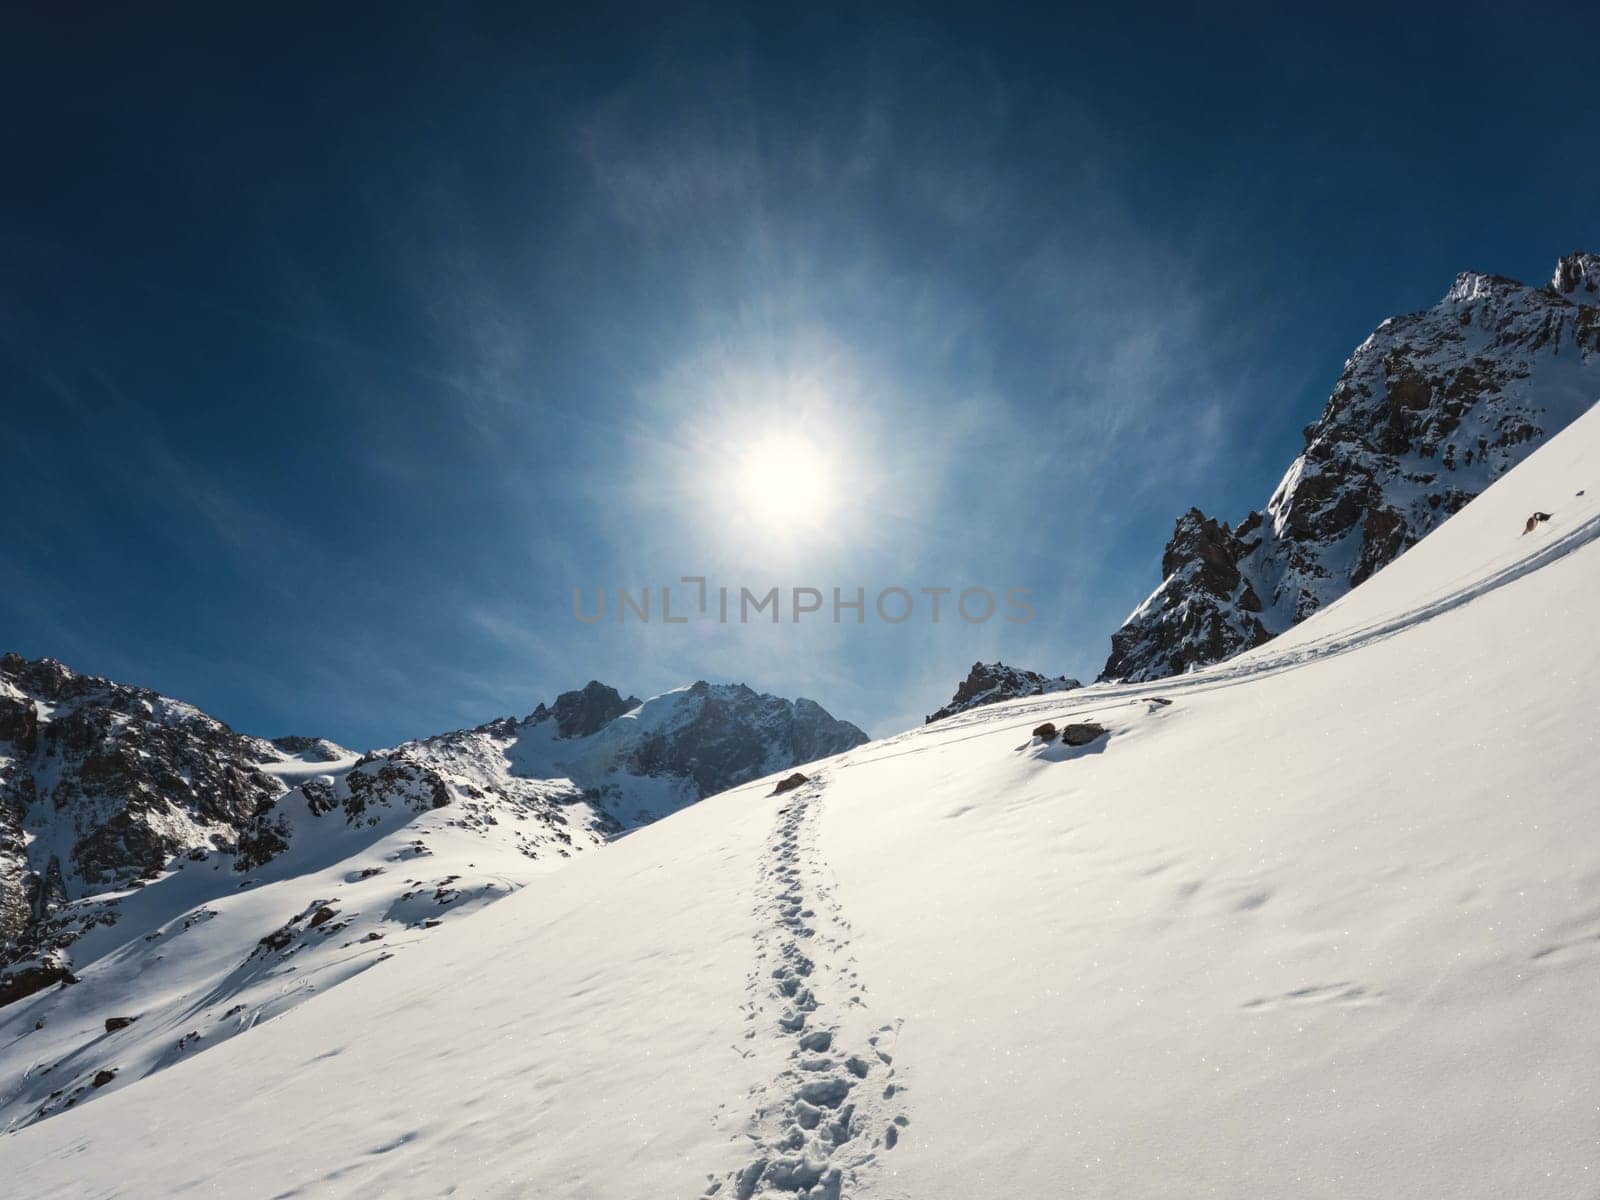 A stunning landscape of a snowcovered mountain with the sun shining through the clouds, creating a breathtaking view of the freezing slopes and icy caps.